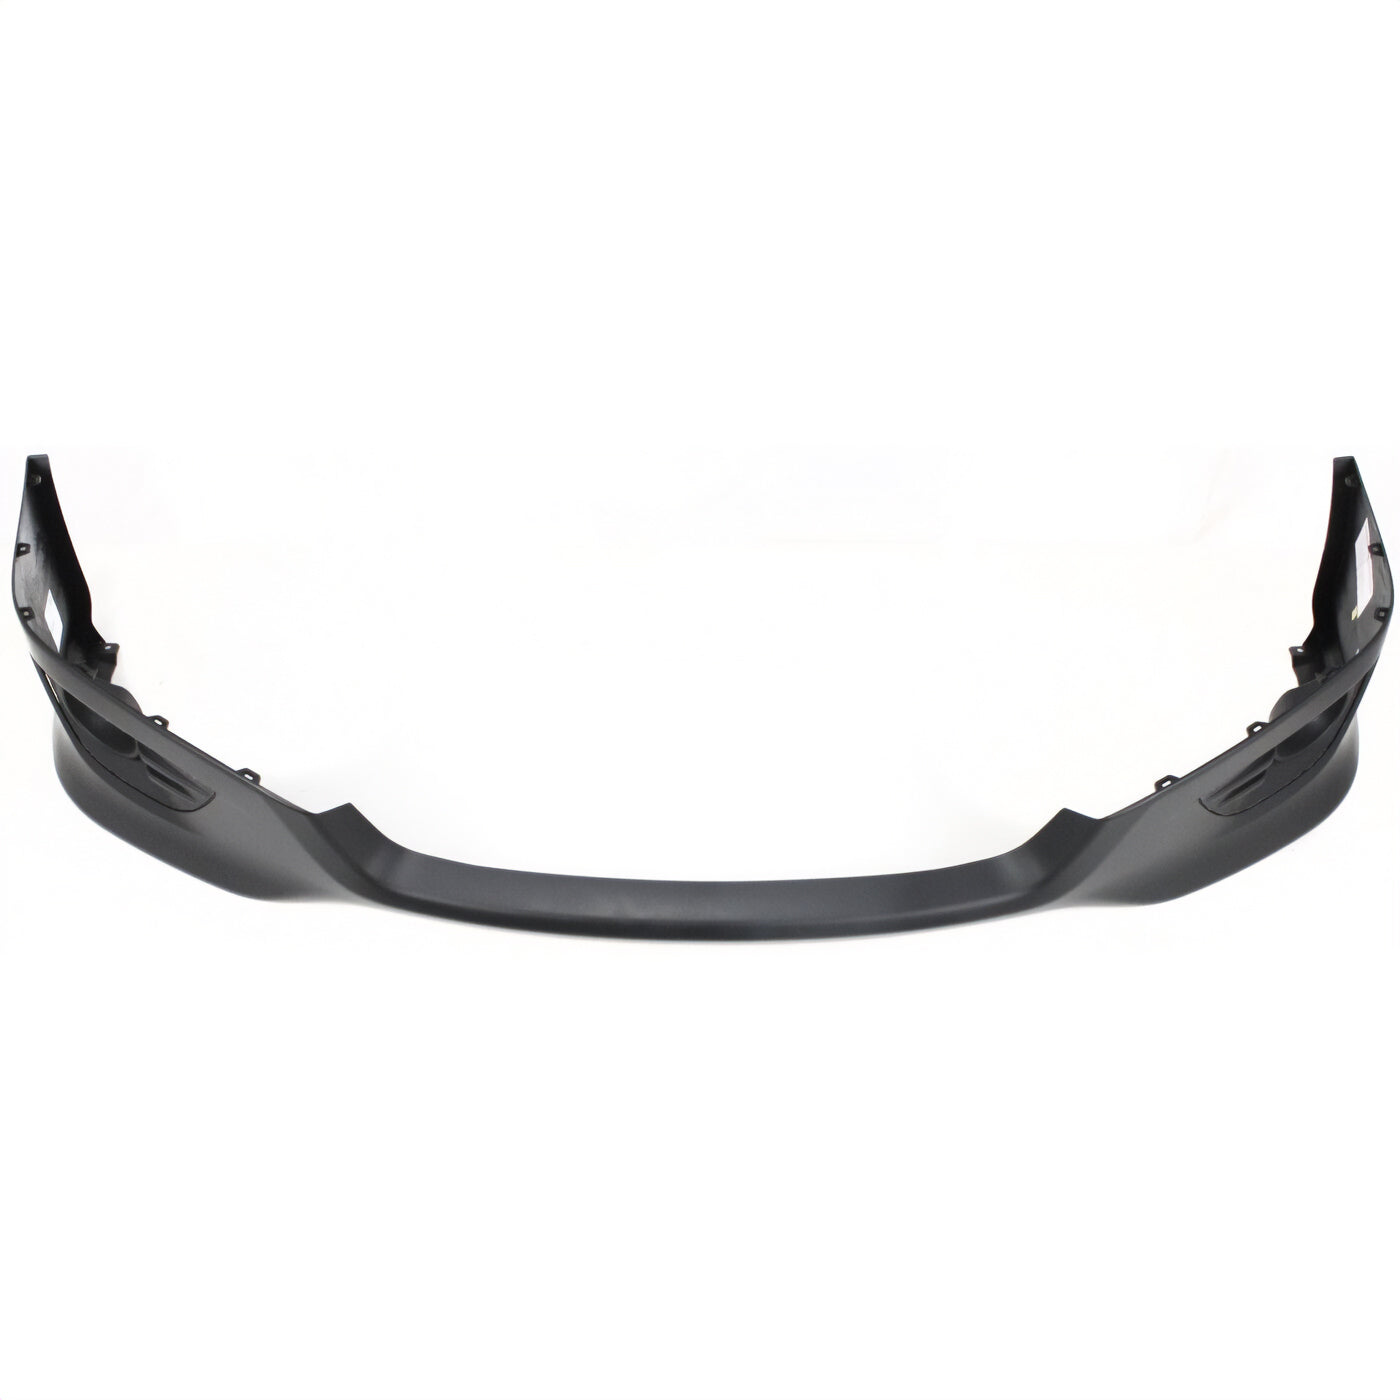 Toyota Camry 2010 - 2011 Front Bumper Spoiler 10 - 11 TO1093120 Bumper-King